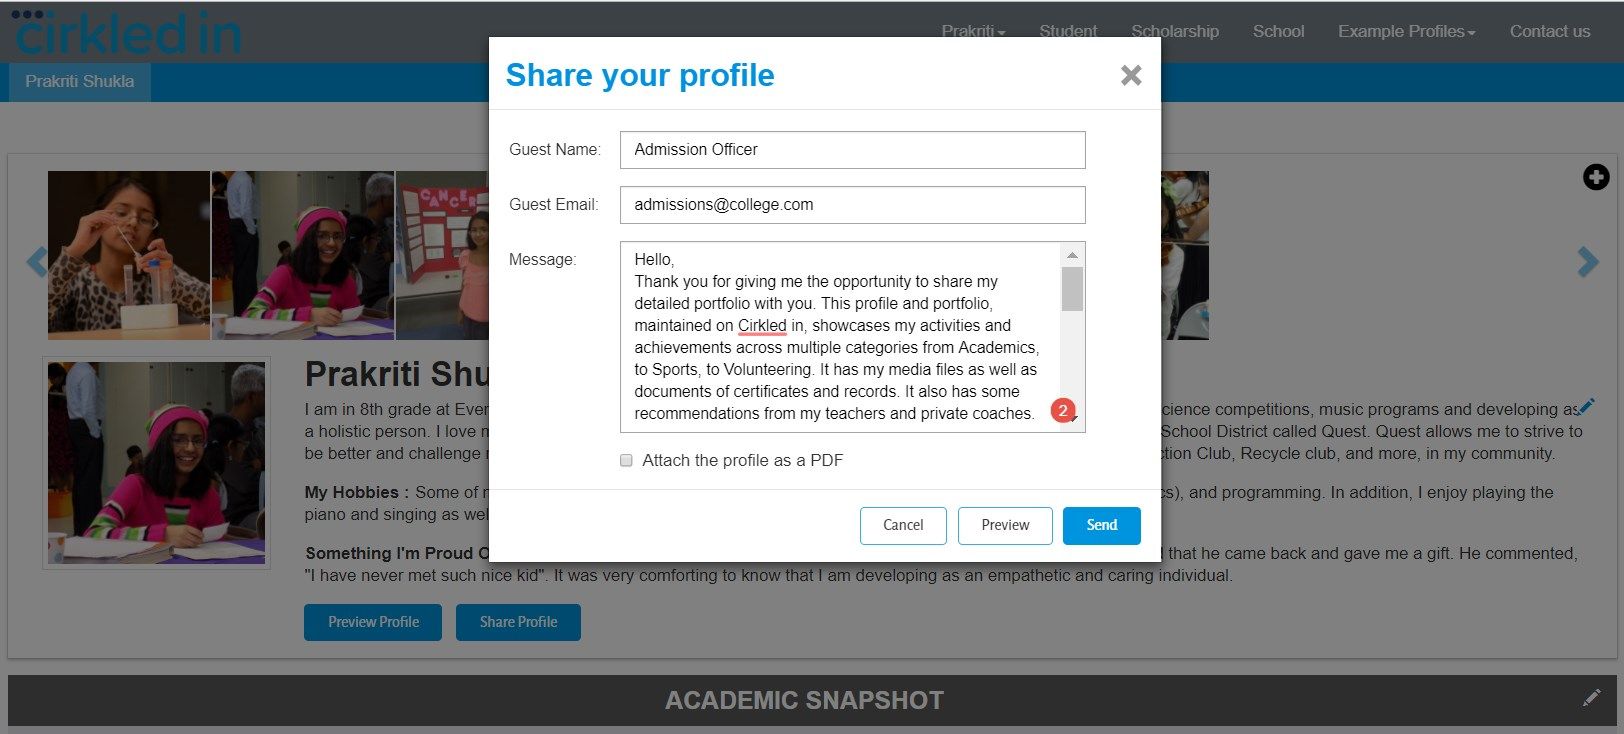 Share your profile securely in one click.